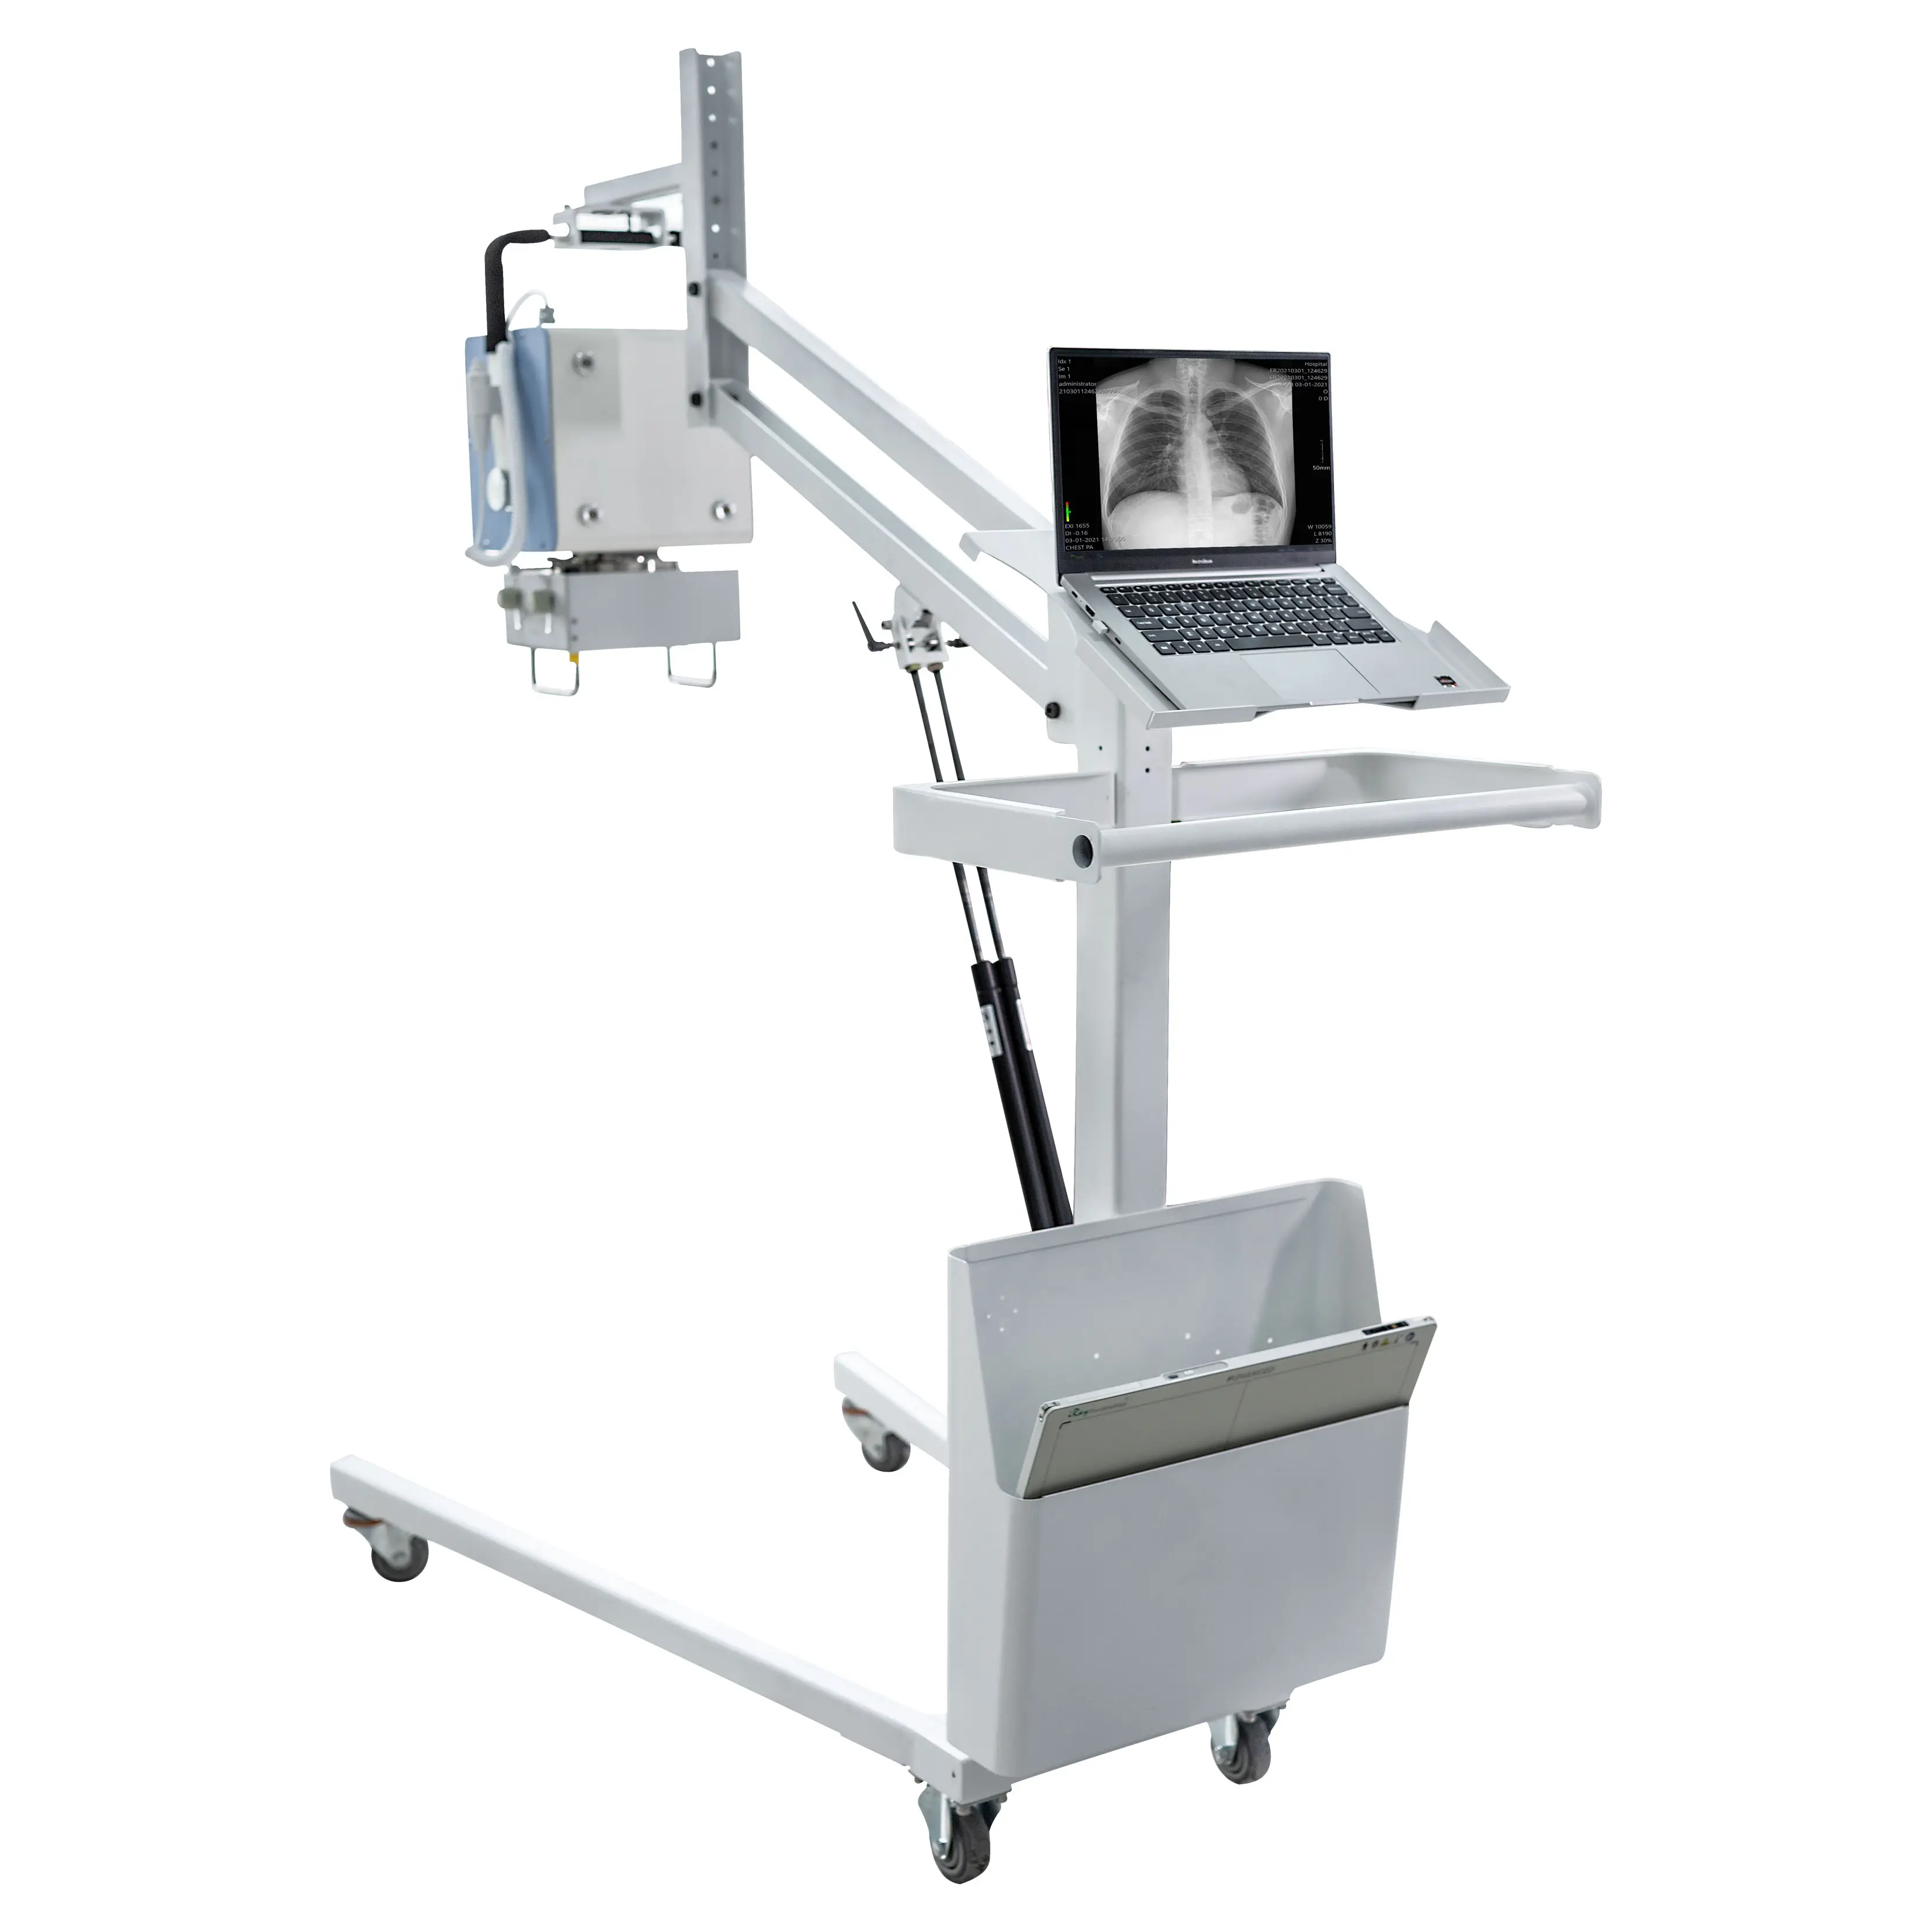 IN-D06 ICEN portable high frequency x-ray machine